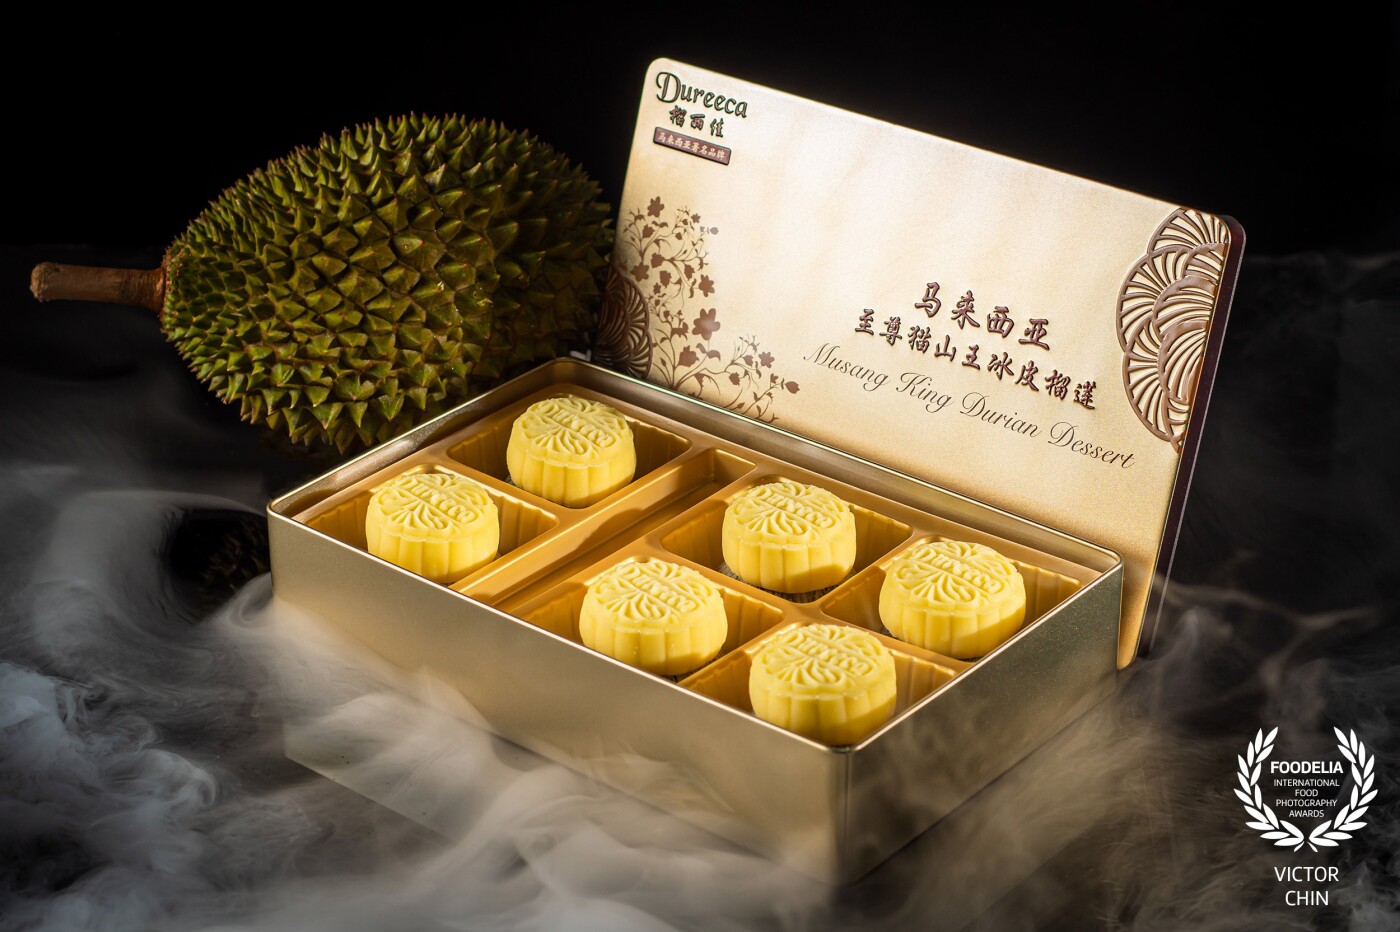 Mid Autumn Festival is just a month away. This mooncake is special as it contains the best type of durian which is Musang King flesh. Durian mooncakes are pretty popular among the Asian regions now.